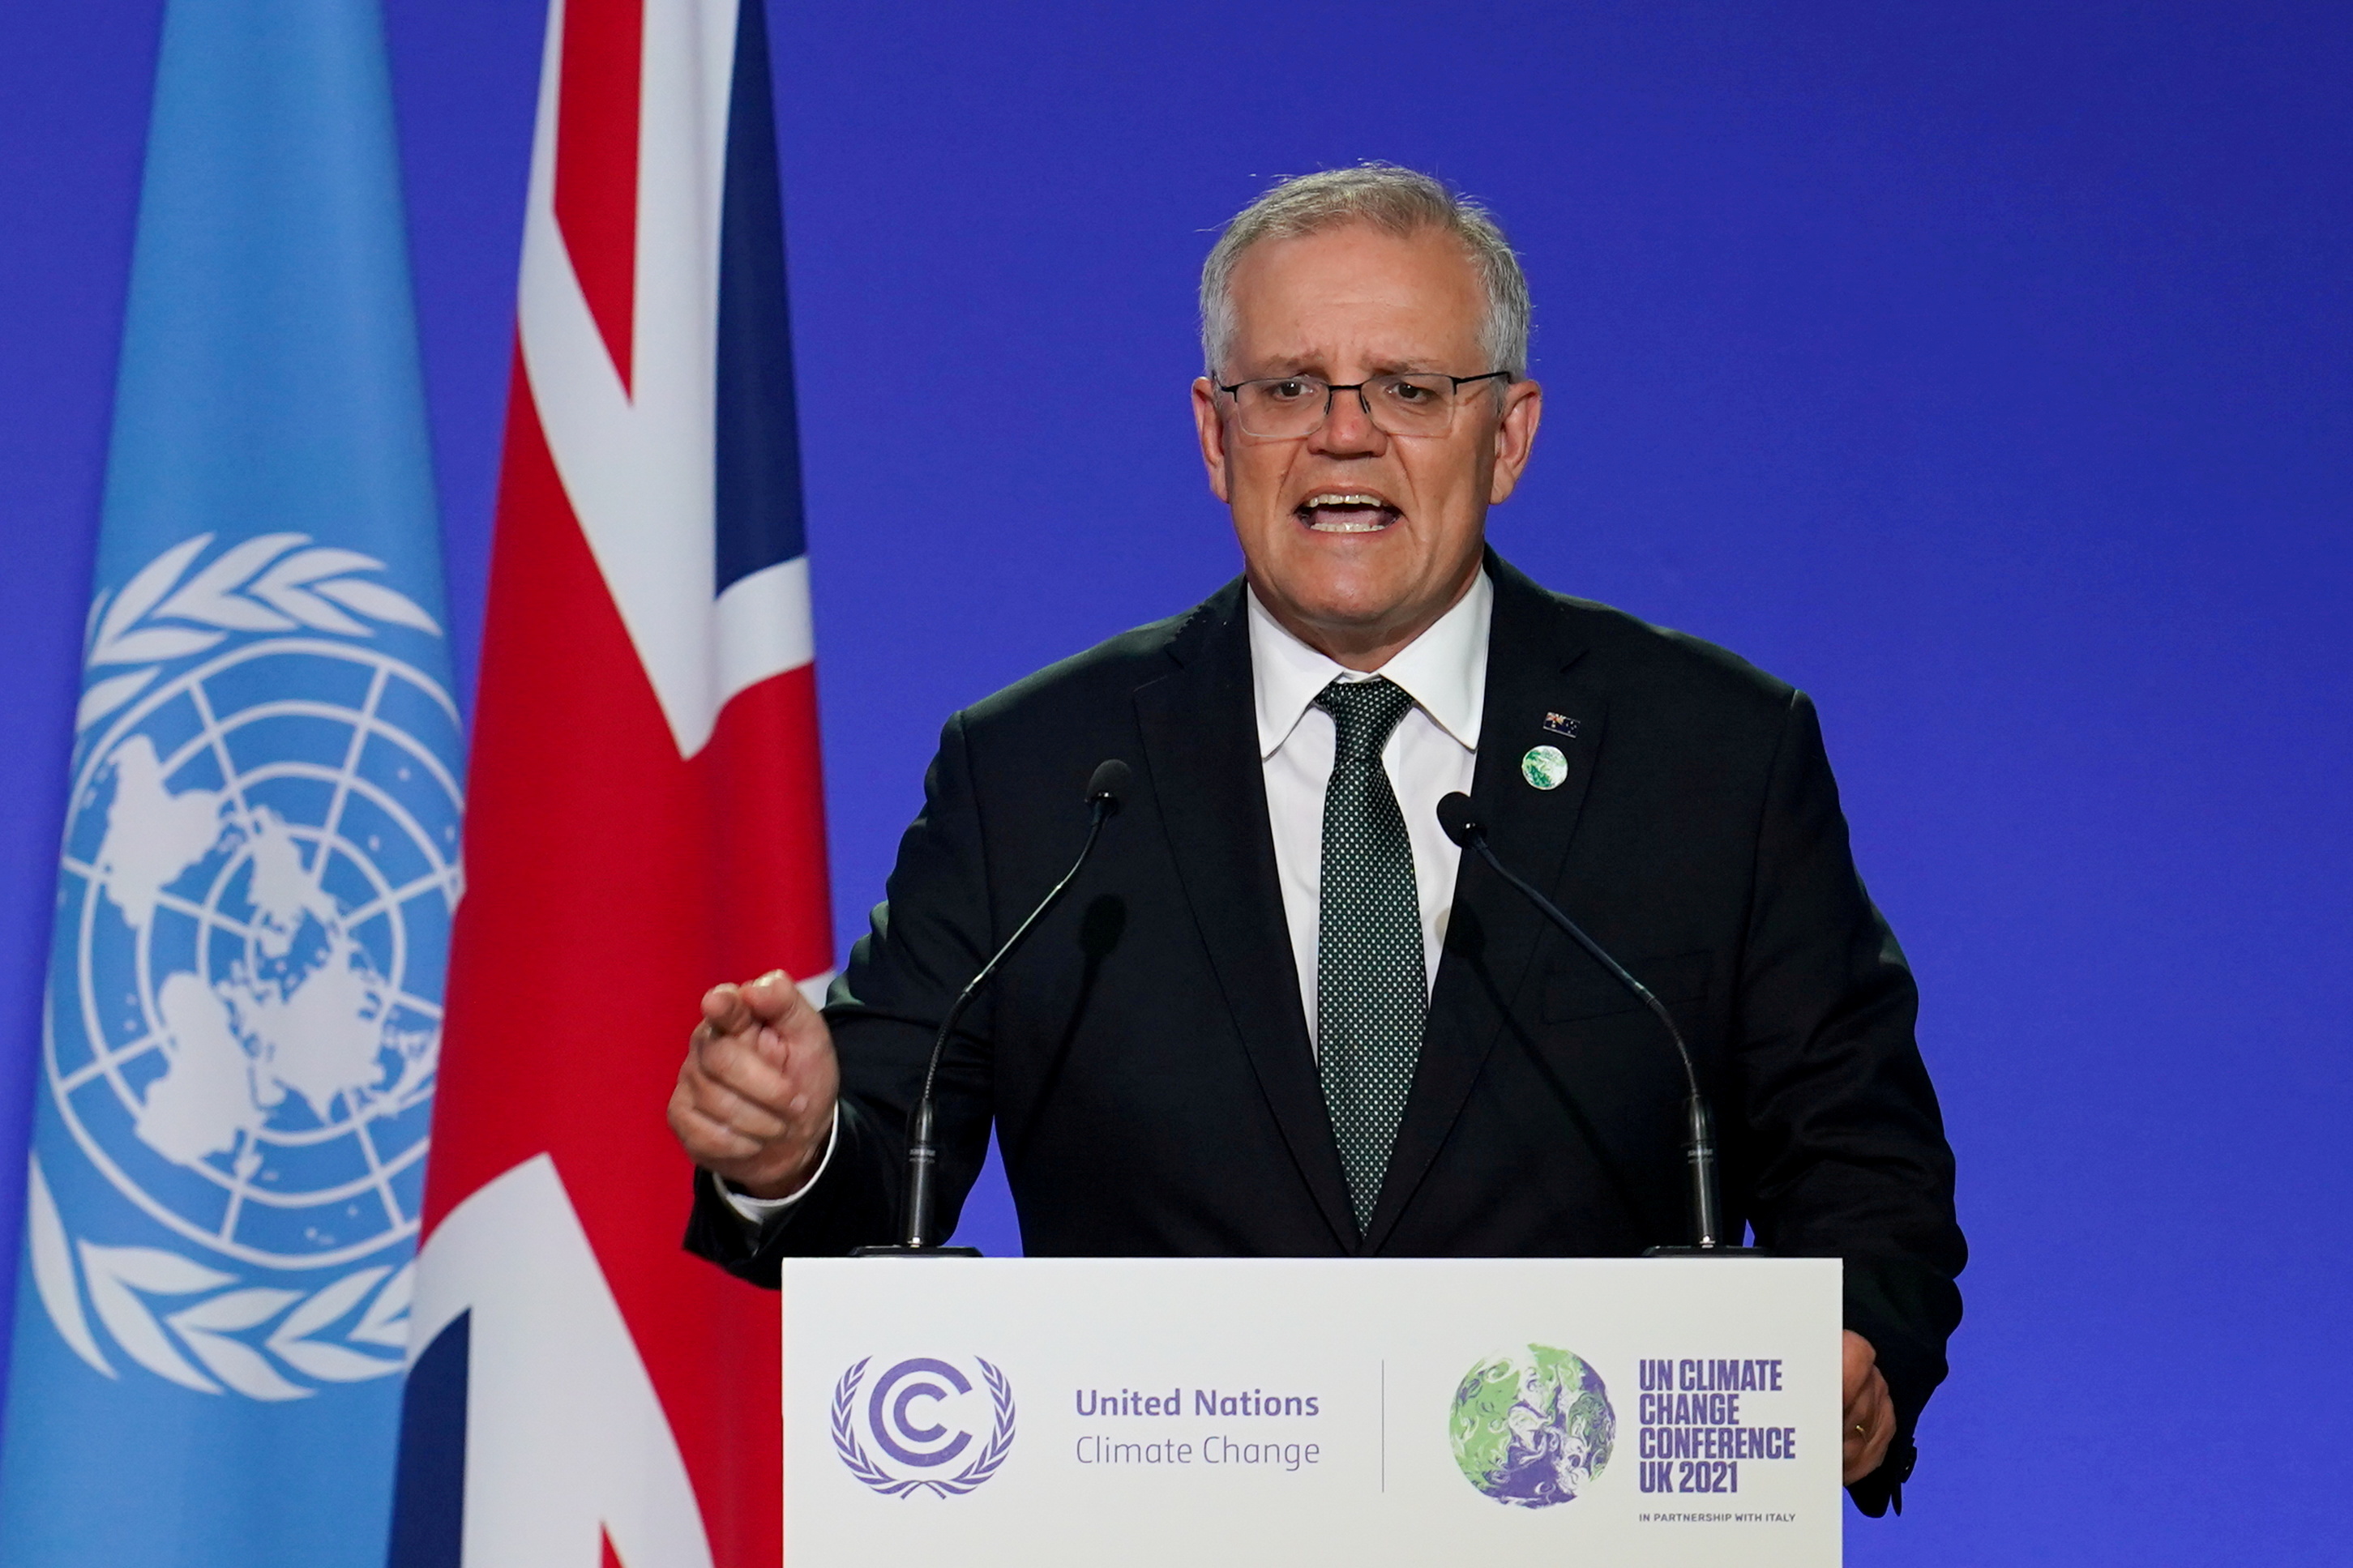 Australia's Prime Minister Scott Morrison speaks as National Statements are delivered as a part of the World Leaders' Summit at the UN Climate Change Conference (COP26) in Glasgow